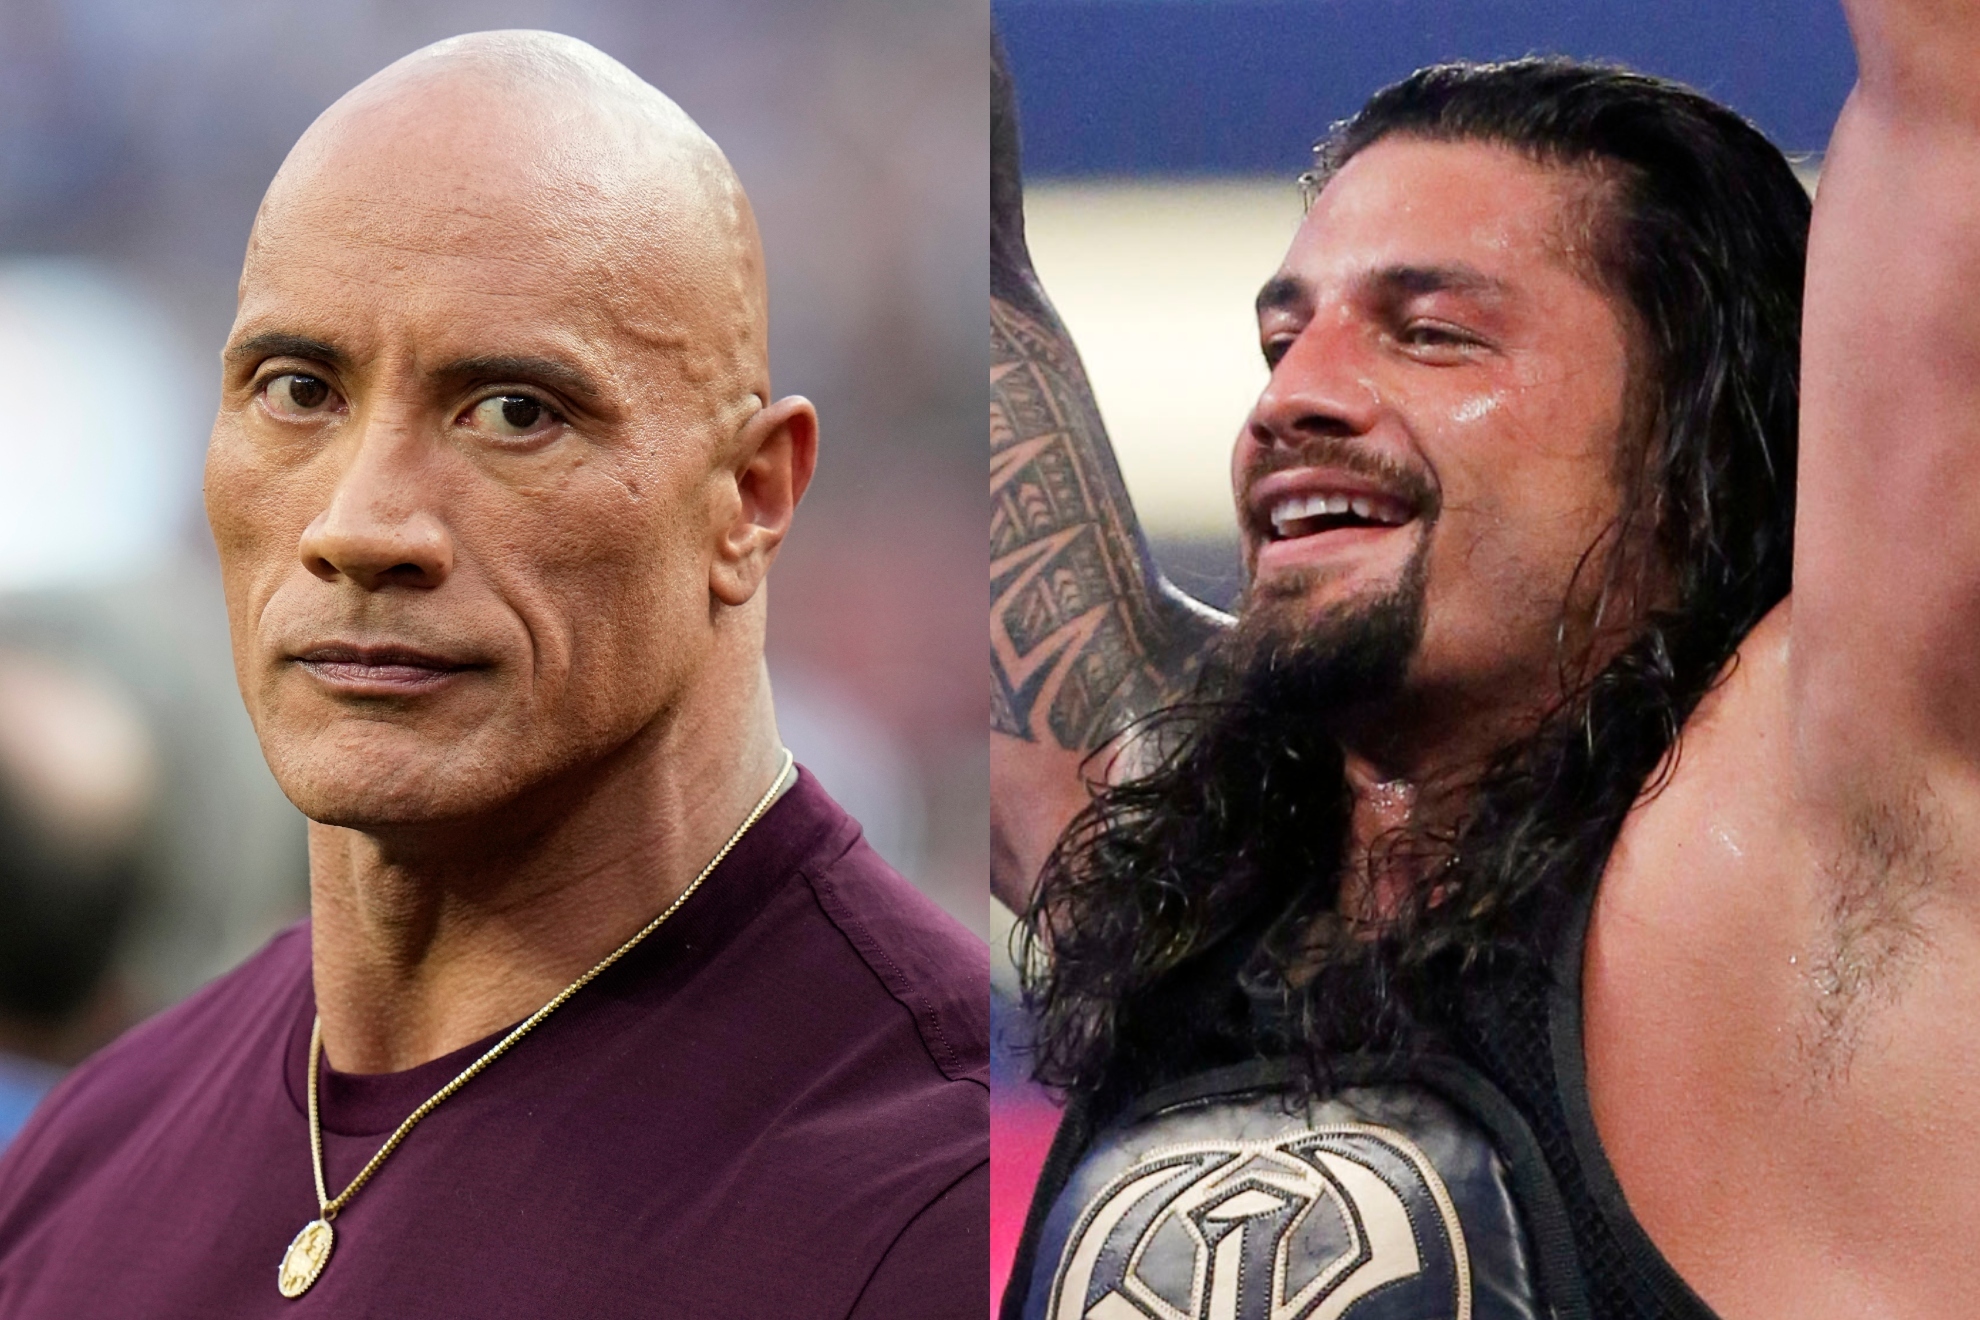 Rumors swirl as WWE teases The Rock's return to face Roman Reigns at SummerSlam 2023